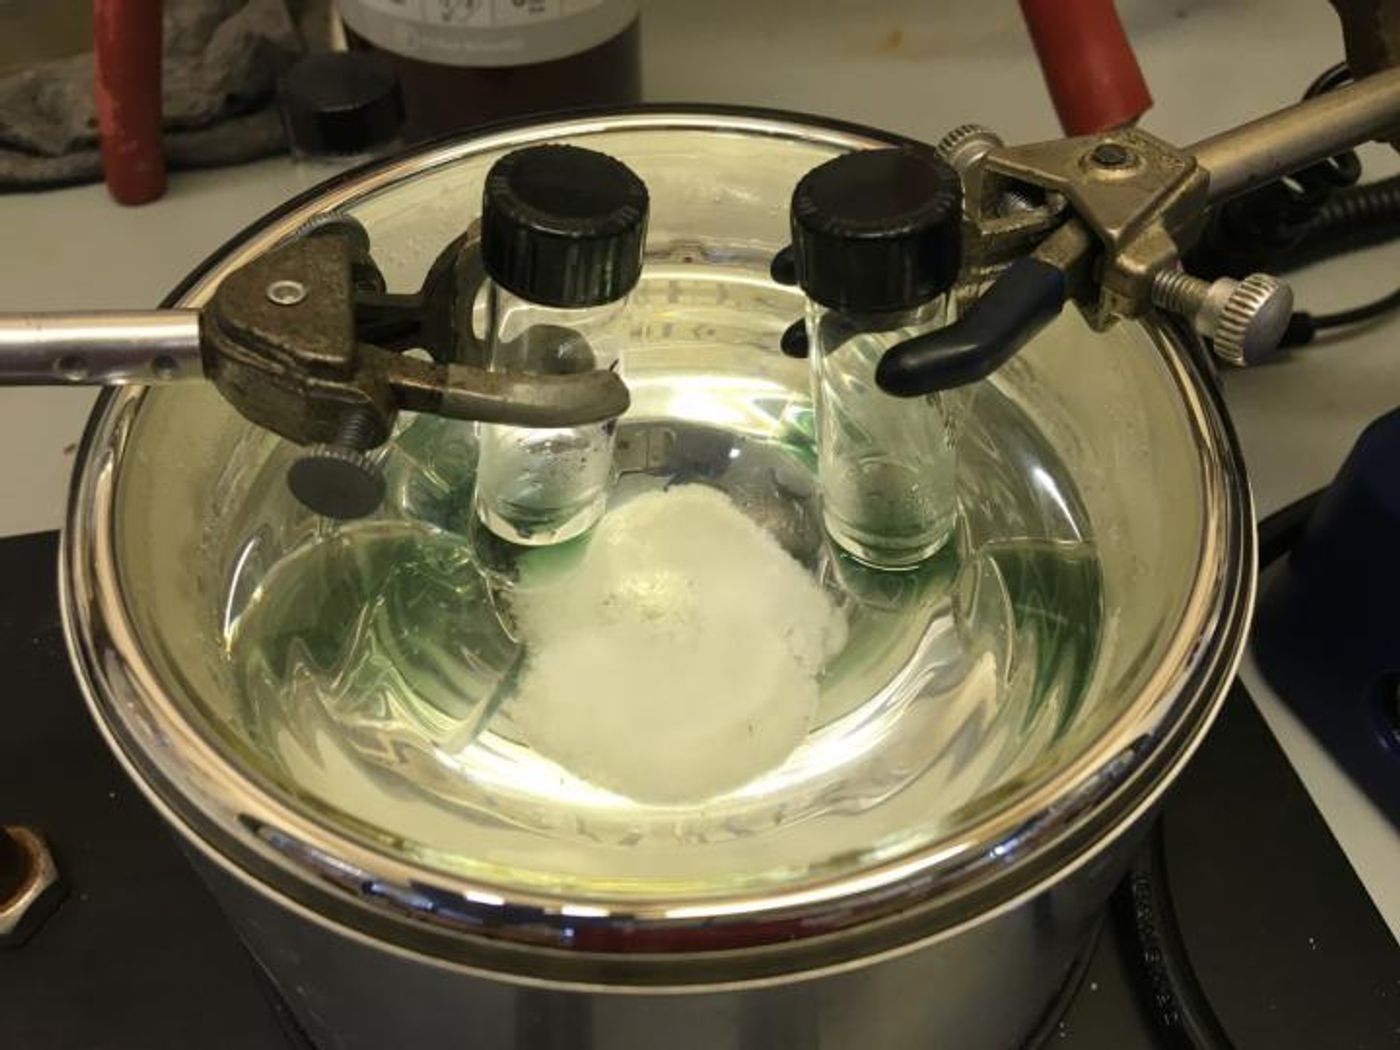 Upon mixing the reactants (copper + ligand + hydrogen peroxide + carbon-hydrogen substrate) the starting colorless solution turns green-blue, indicating that an oxidative process is occurring. (SMU)